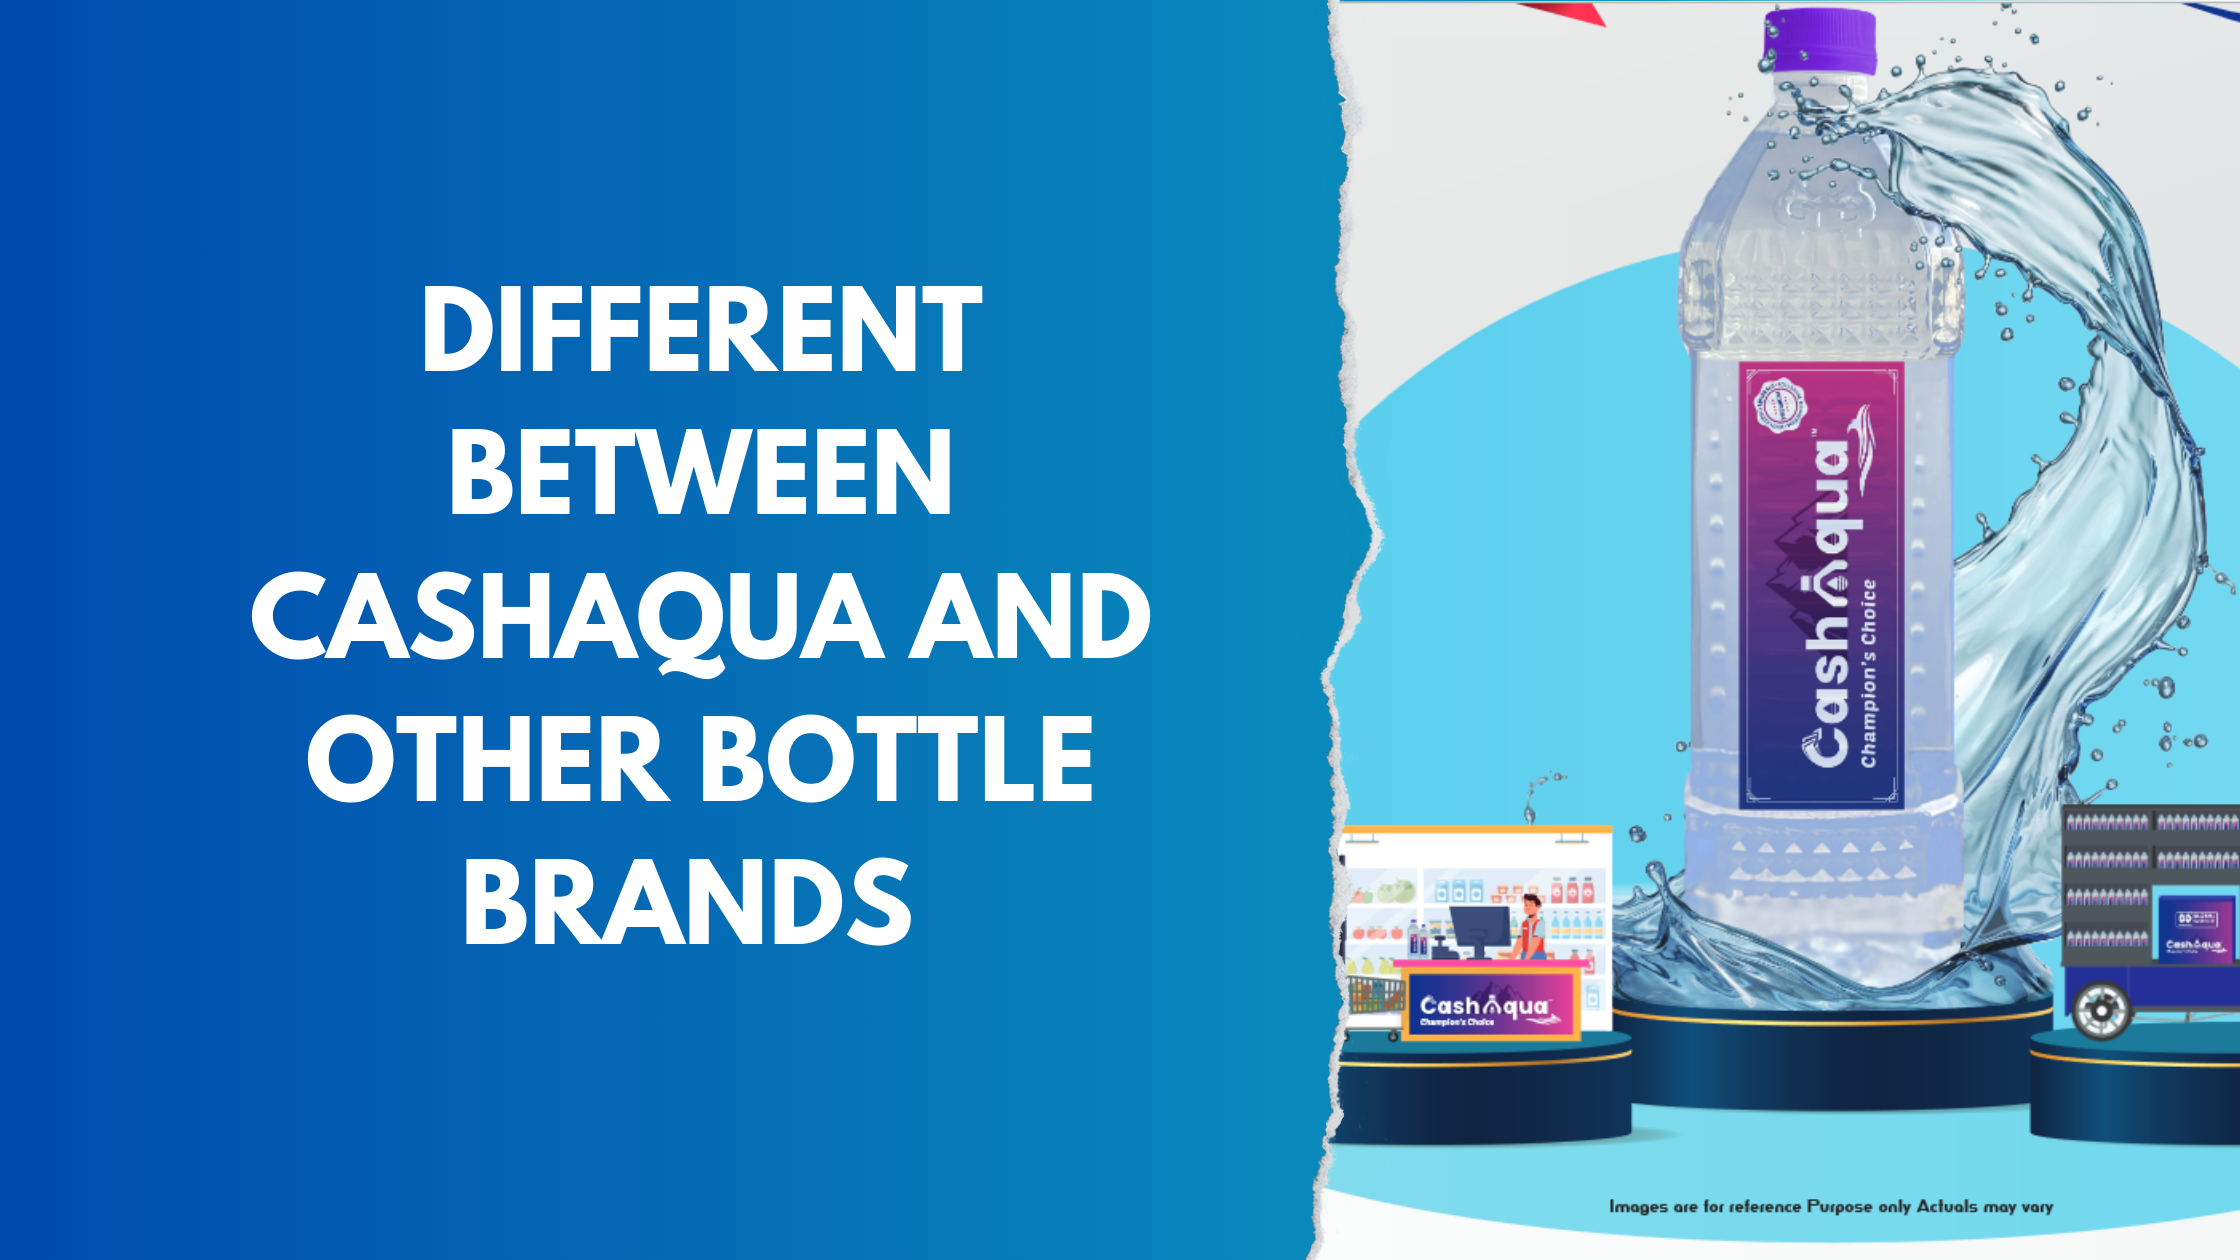 Different Between CashAqua and Other Bottle Brands